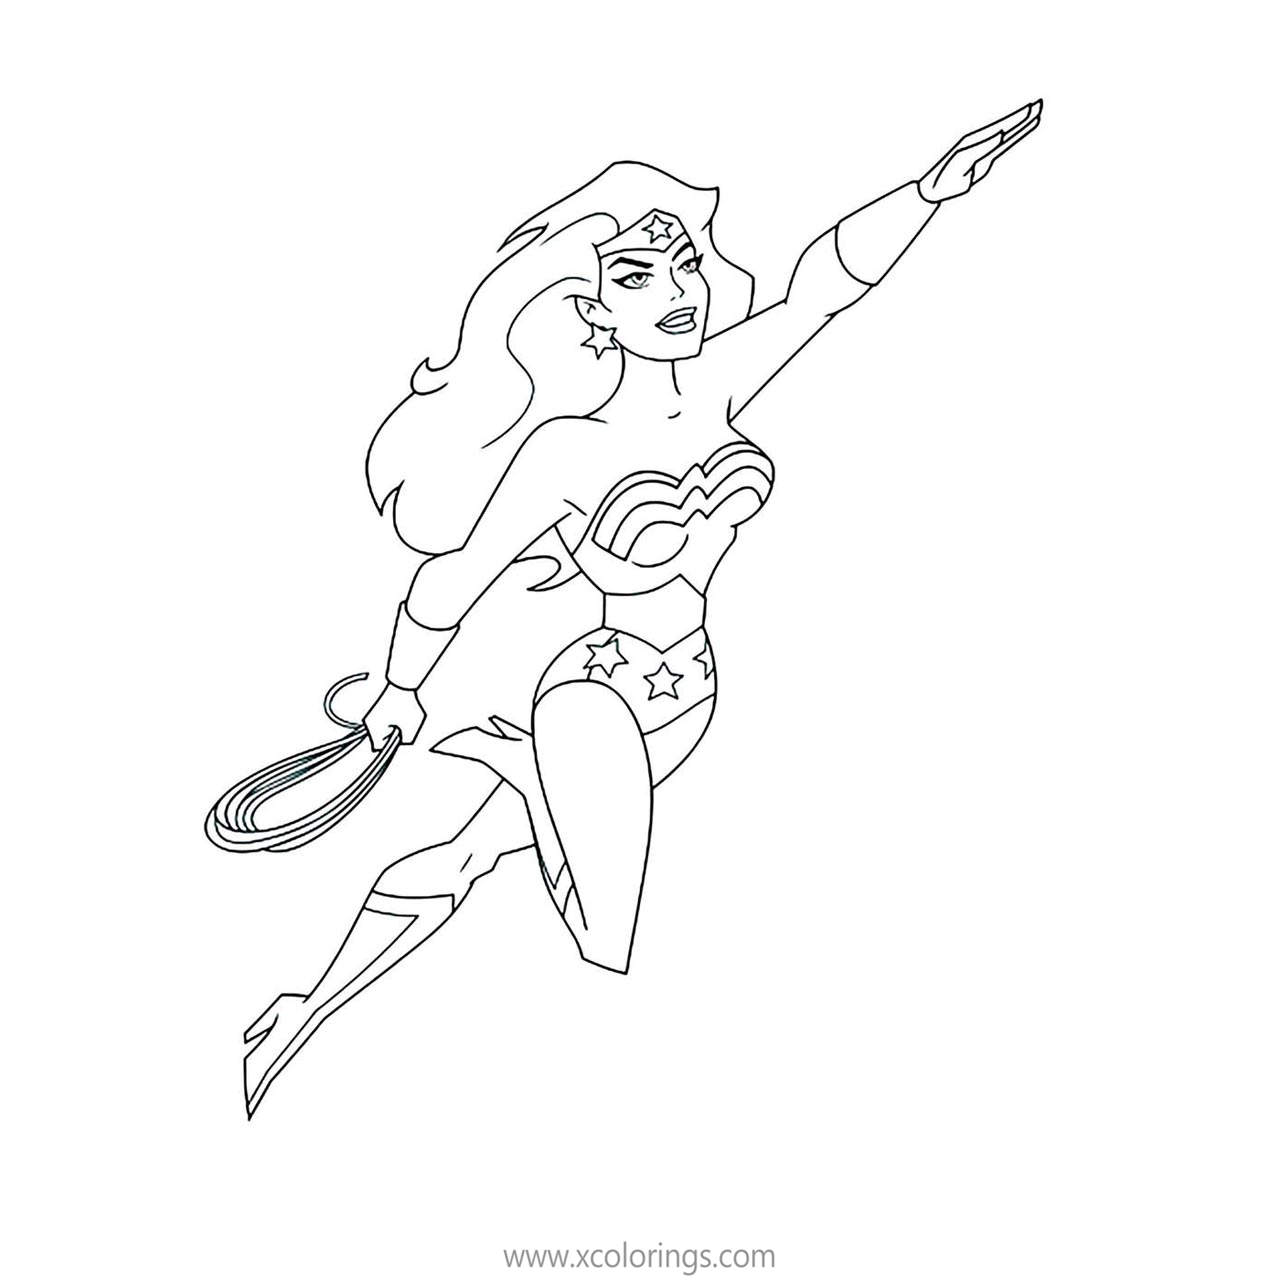 Free Animated Wonder Woman Coloring Pages Flying to Fight printable